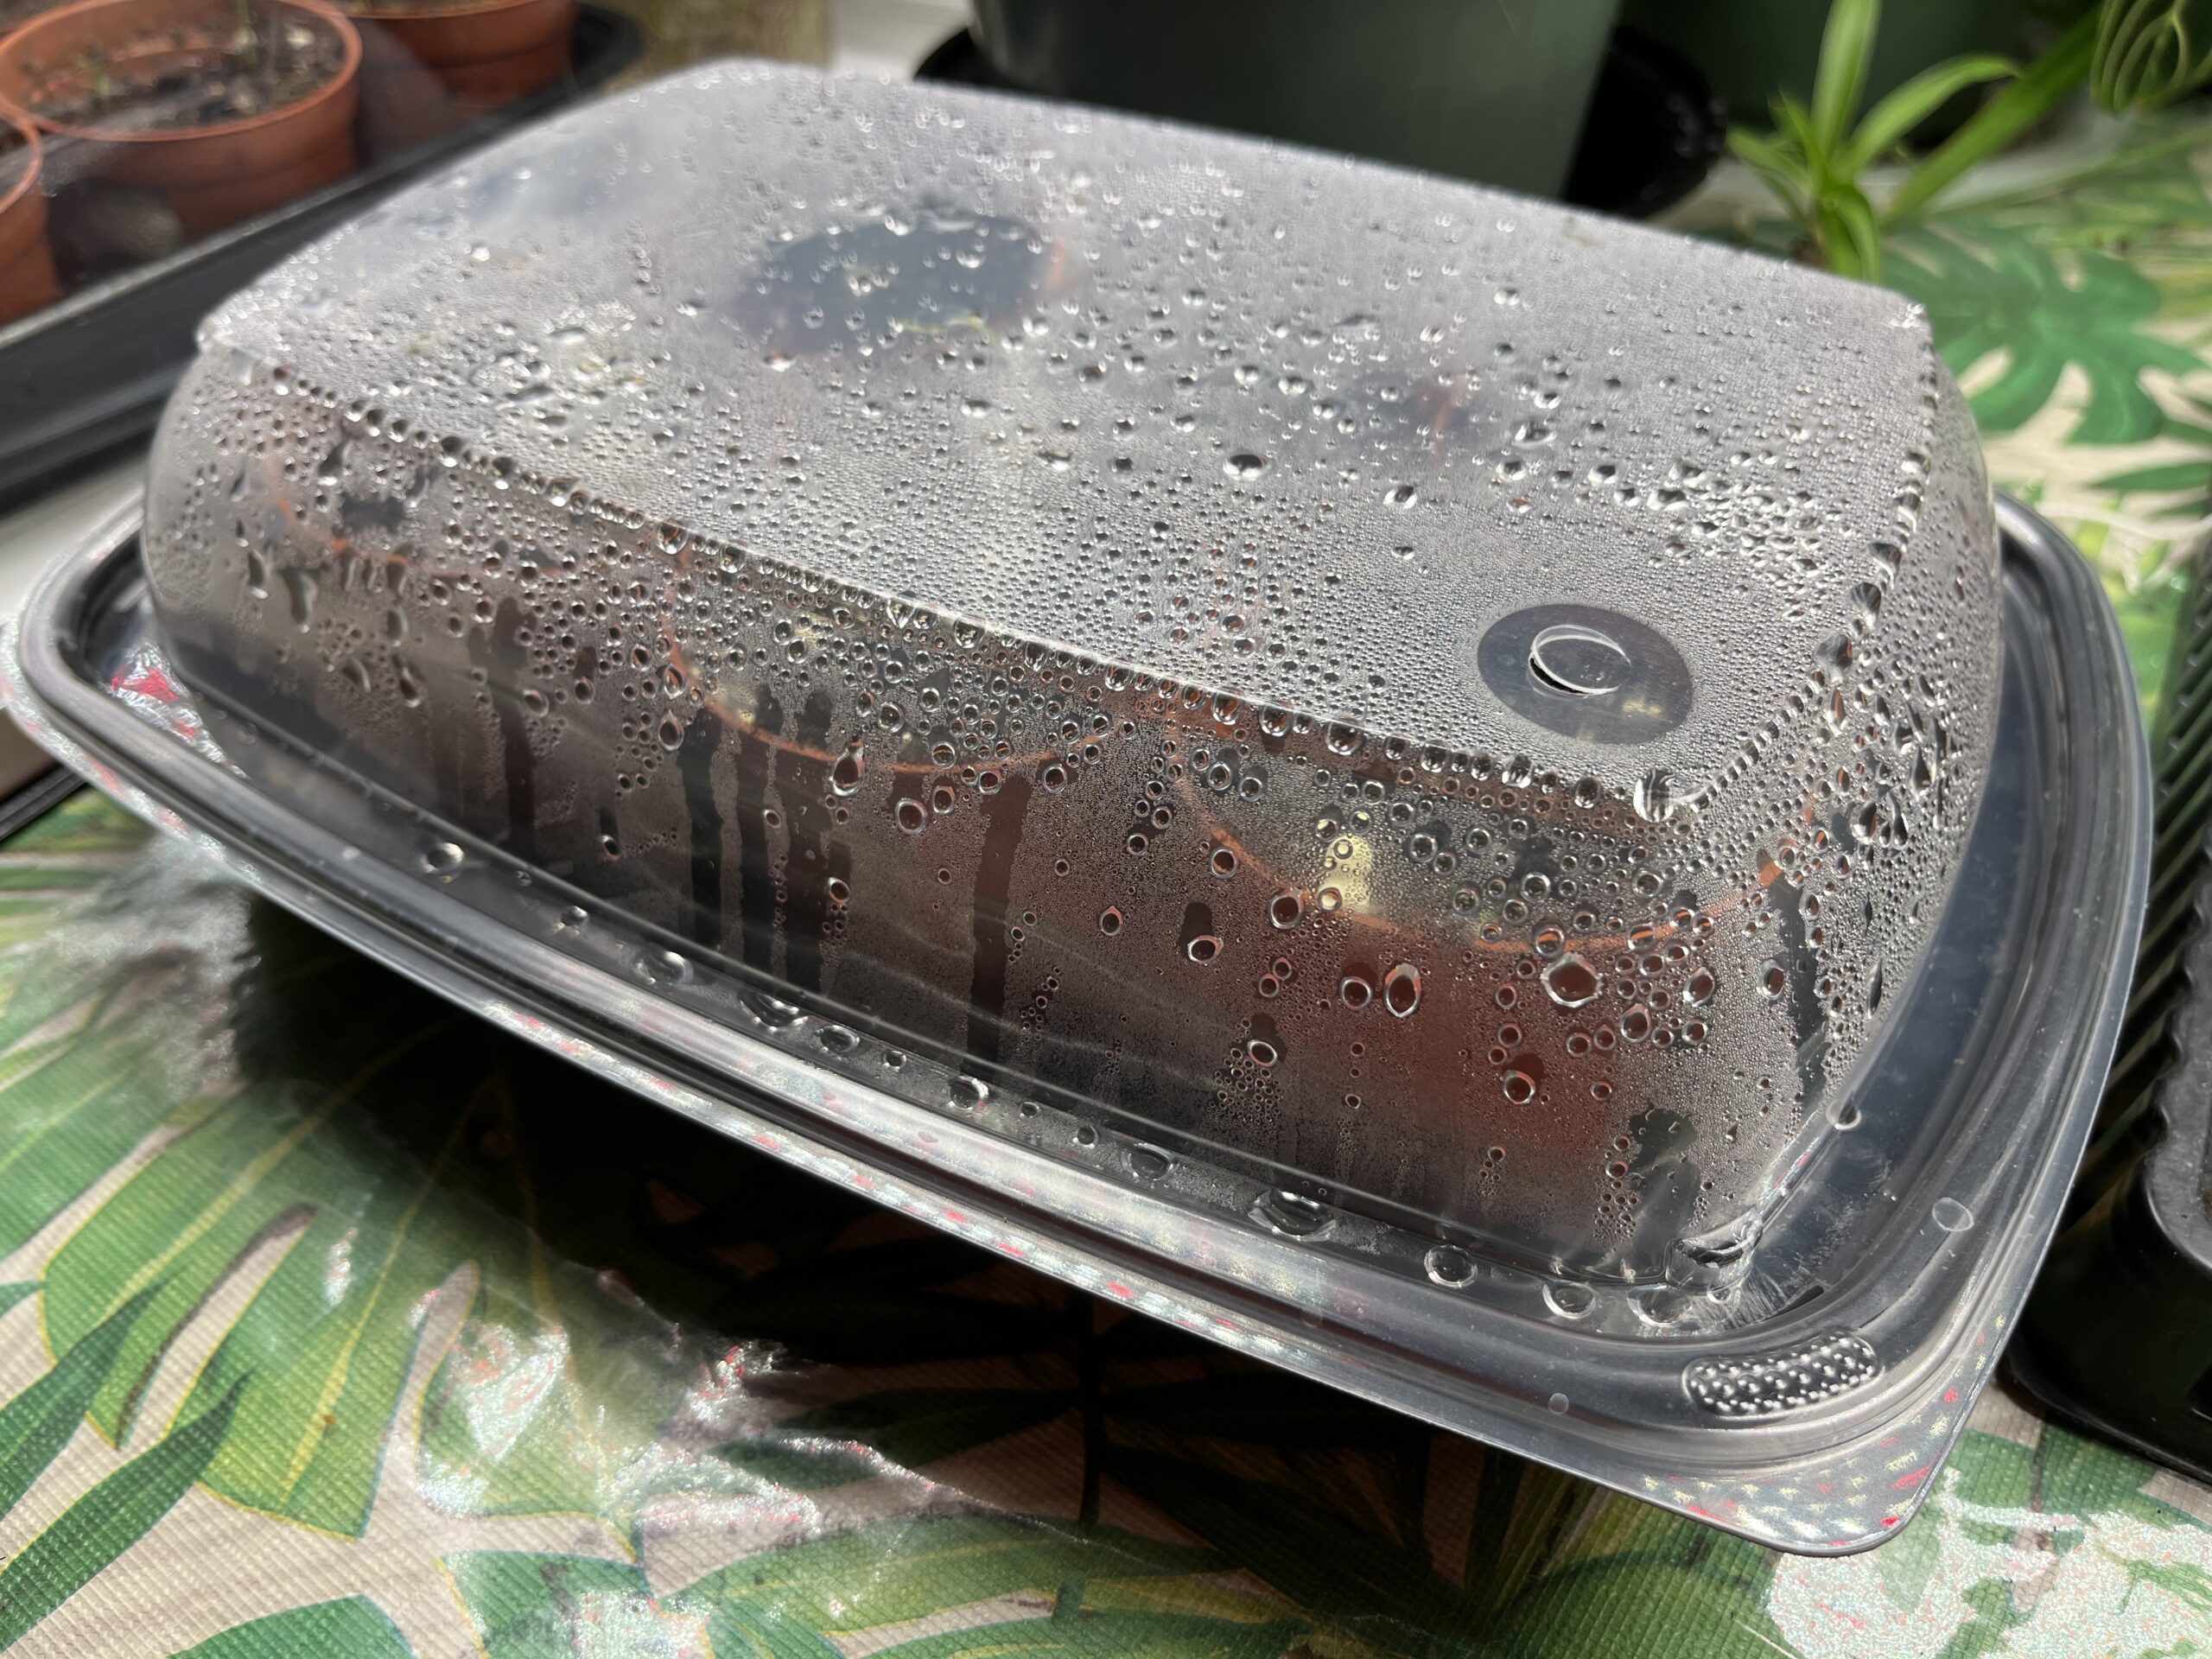 Takeout container propagation